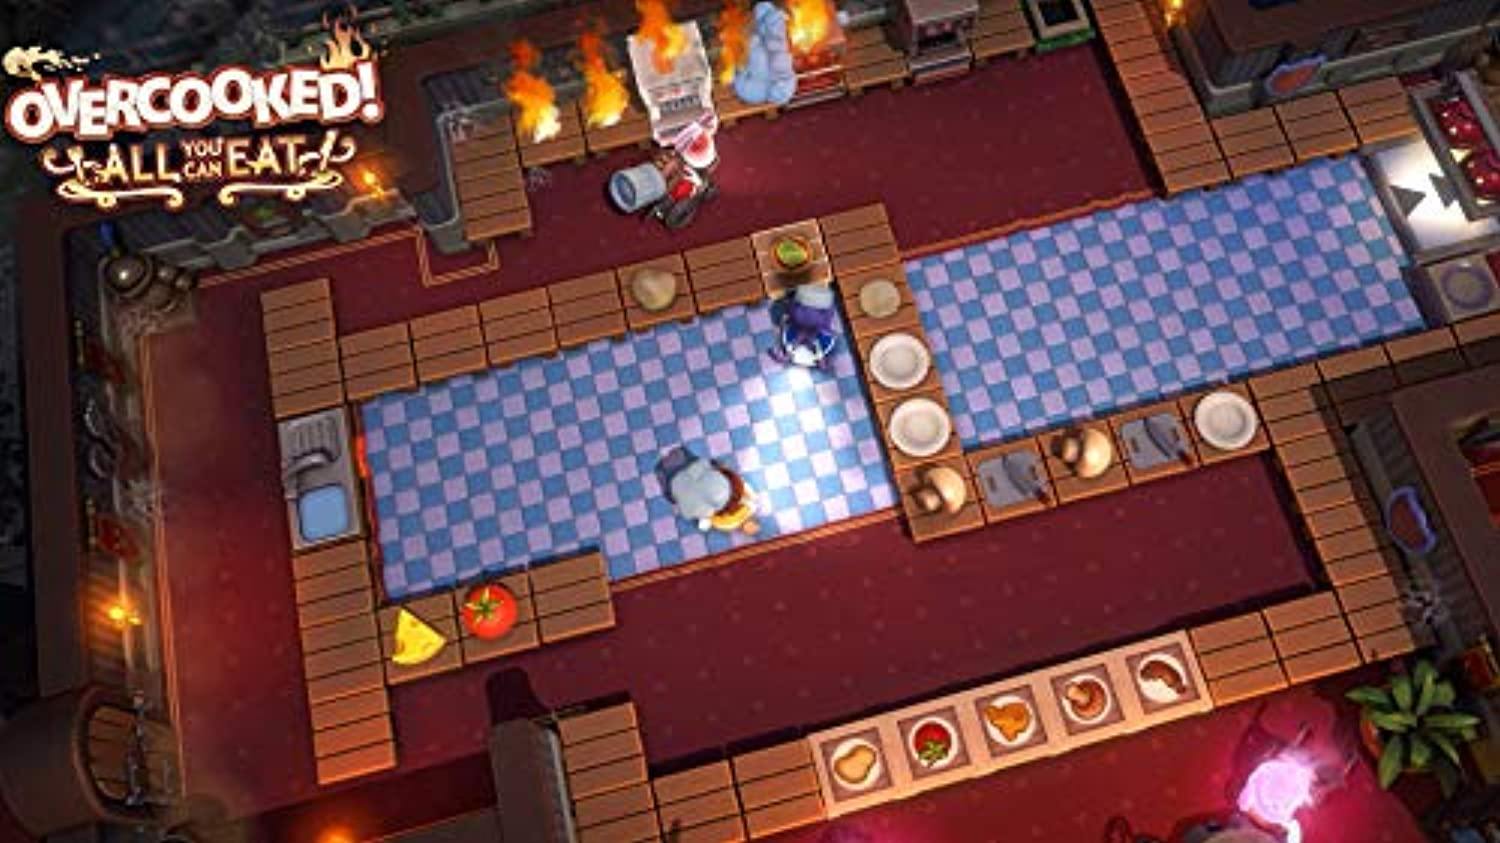 Overcooked! All You Can Eat (PS5) - Offer Games